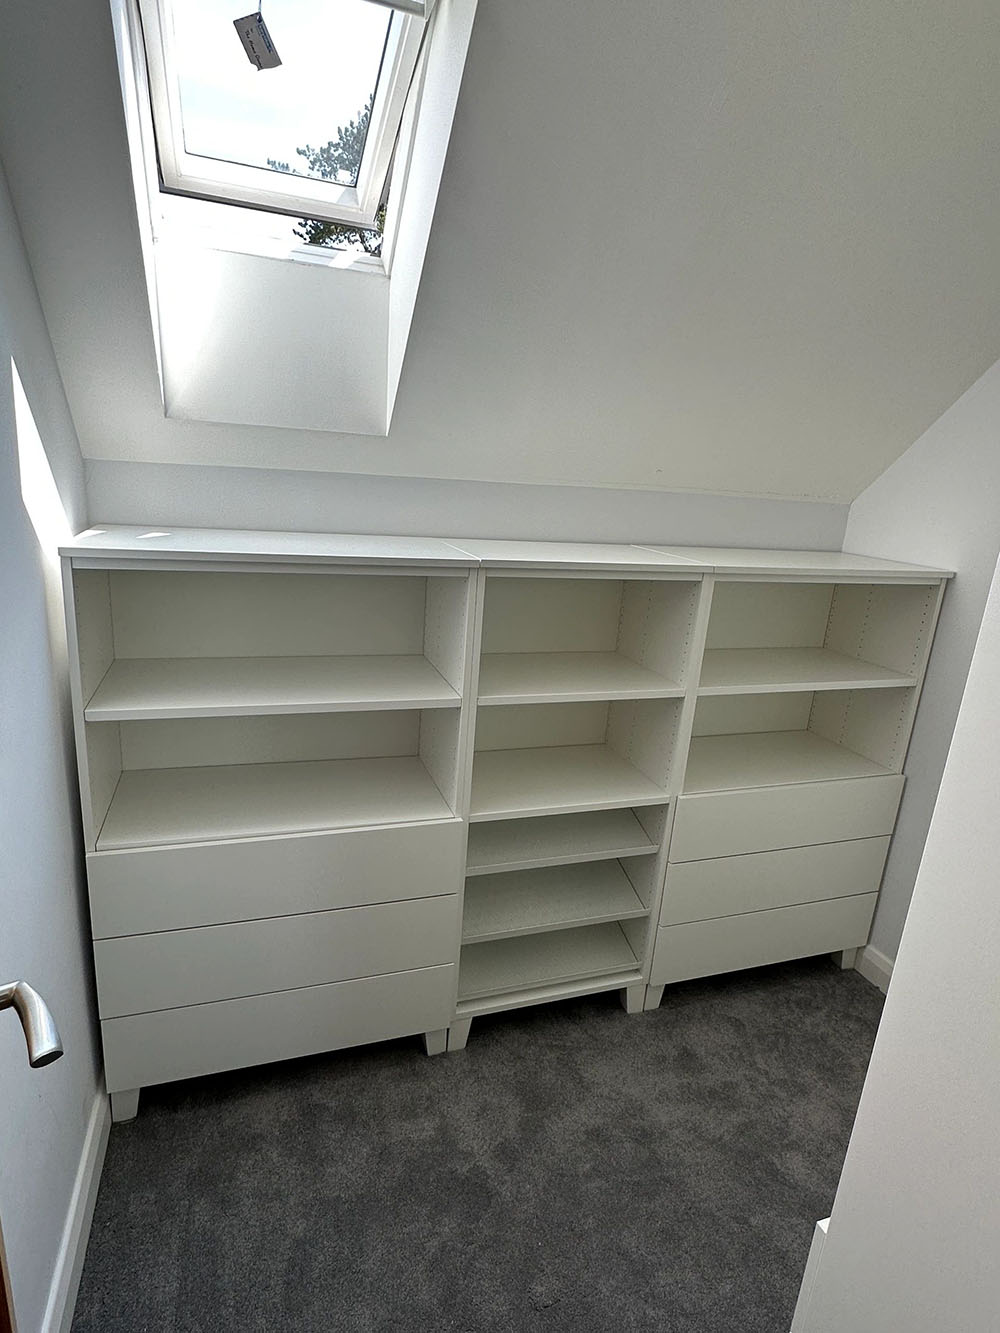 Fitted cabinet